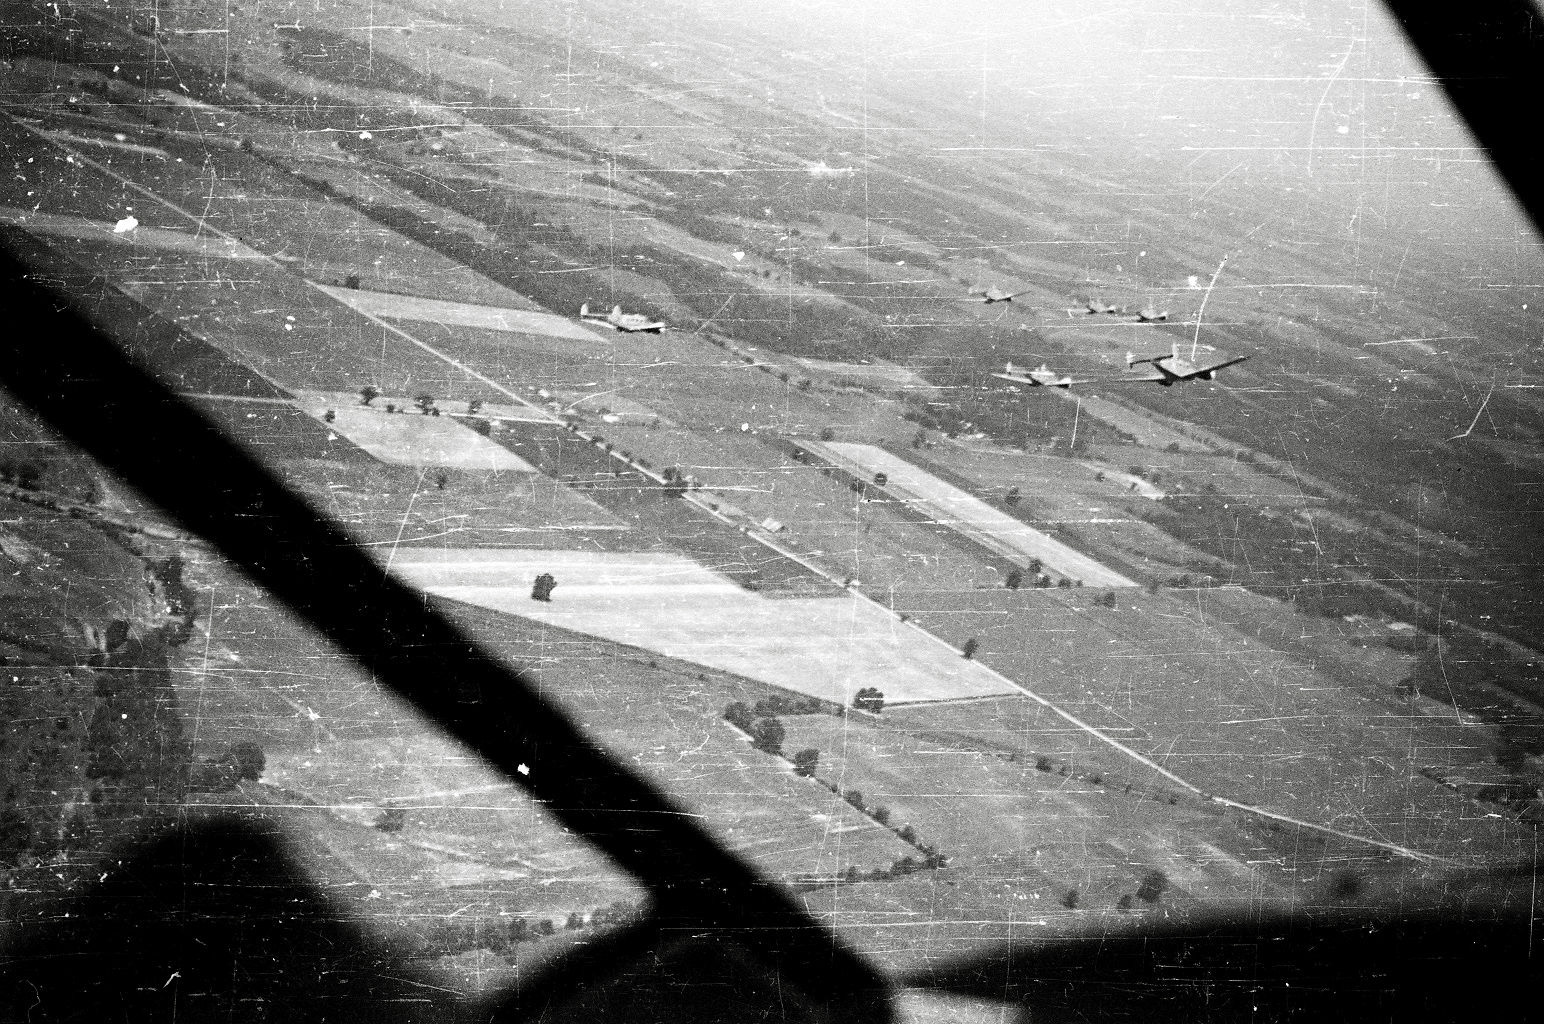 From a collection of WW2 negatives I recently acquired. Aerial shot of US planes in air somewhere in Europe. View full size.